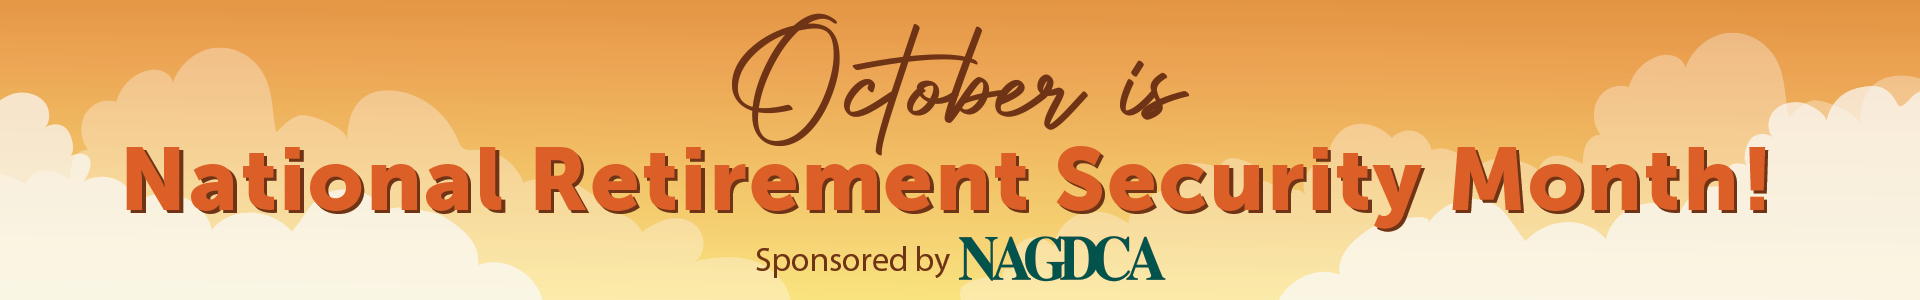 October is National Retirement Security Month! Sponsored by NAGDCA.